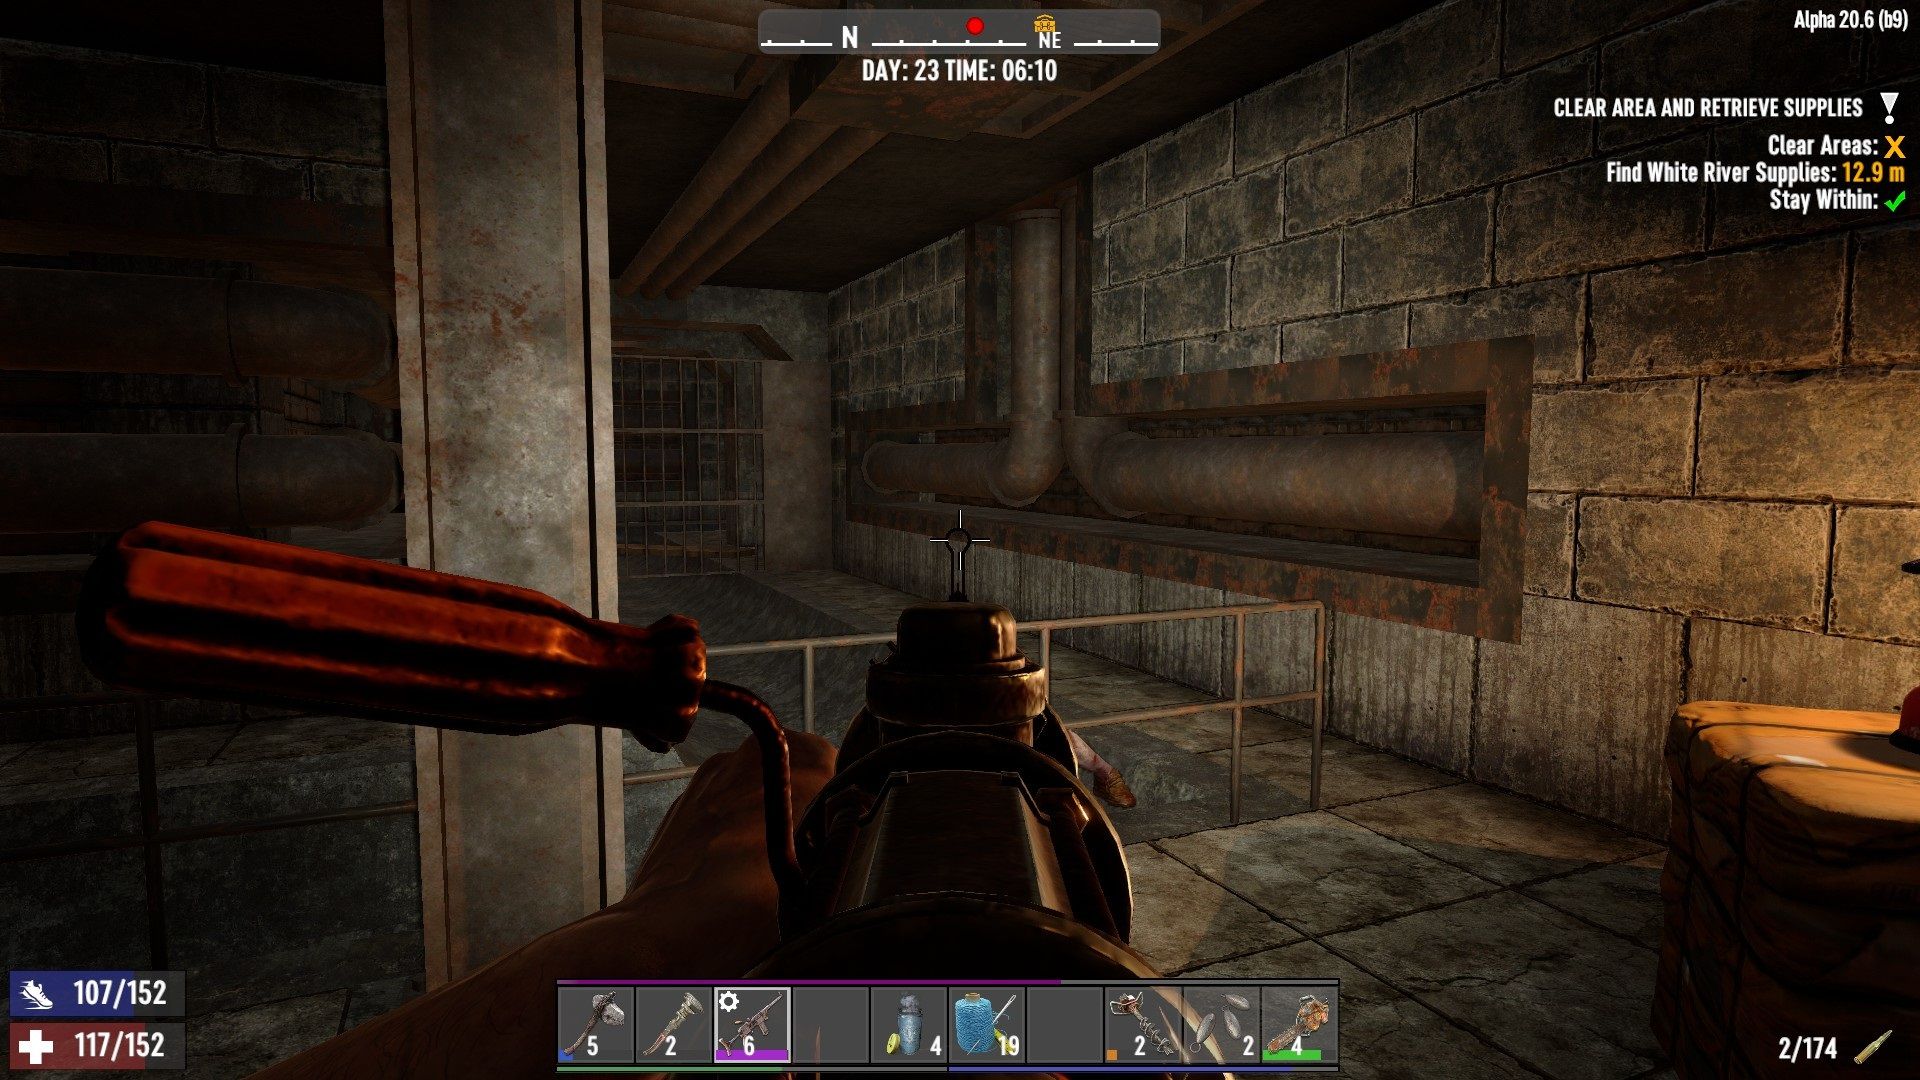 sewer Apartment Building 249 7 Days To Die.jpg